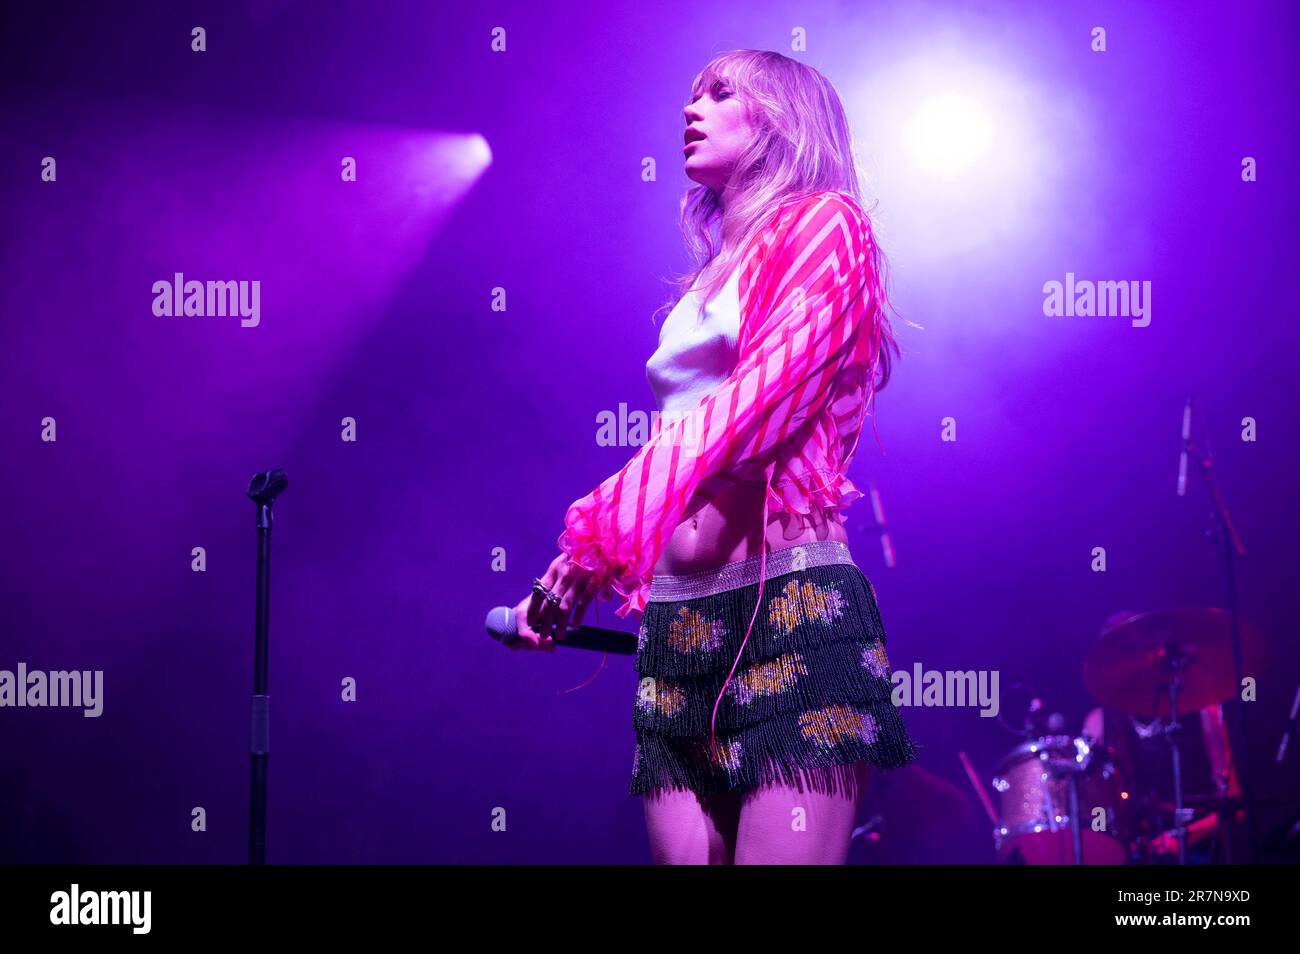 Suki Waterhouse And Drummer Emilia Paige Perform During Day 1 Of The 2023 Bonnaroo Music And Arts